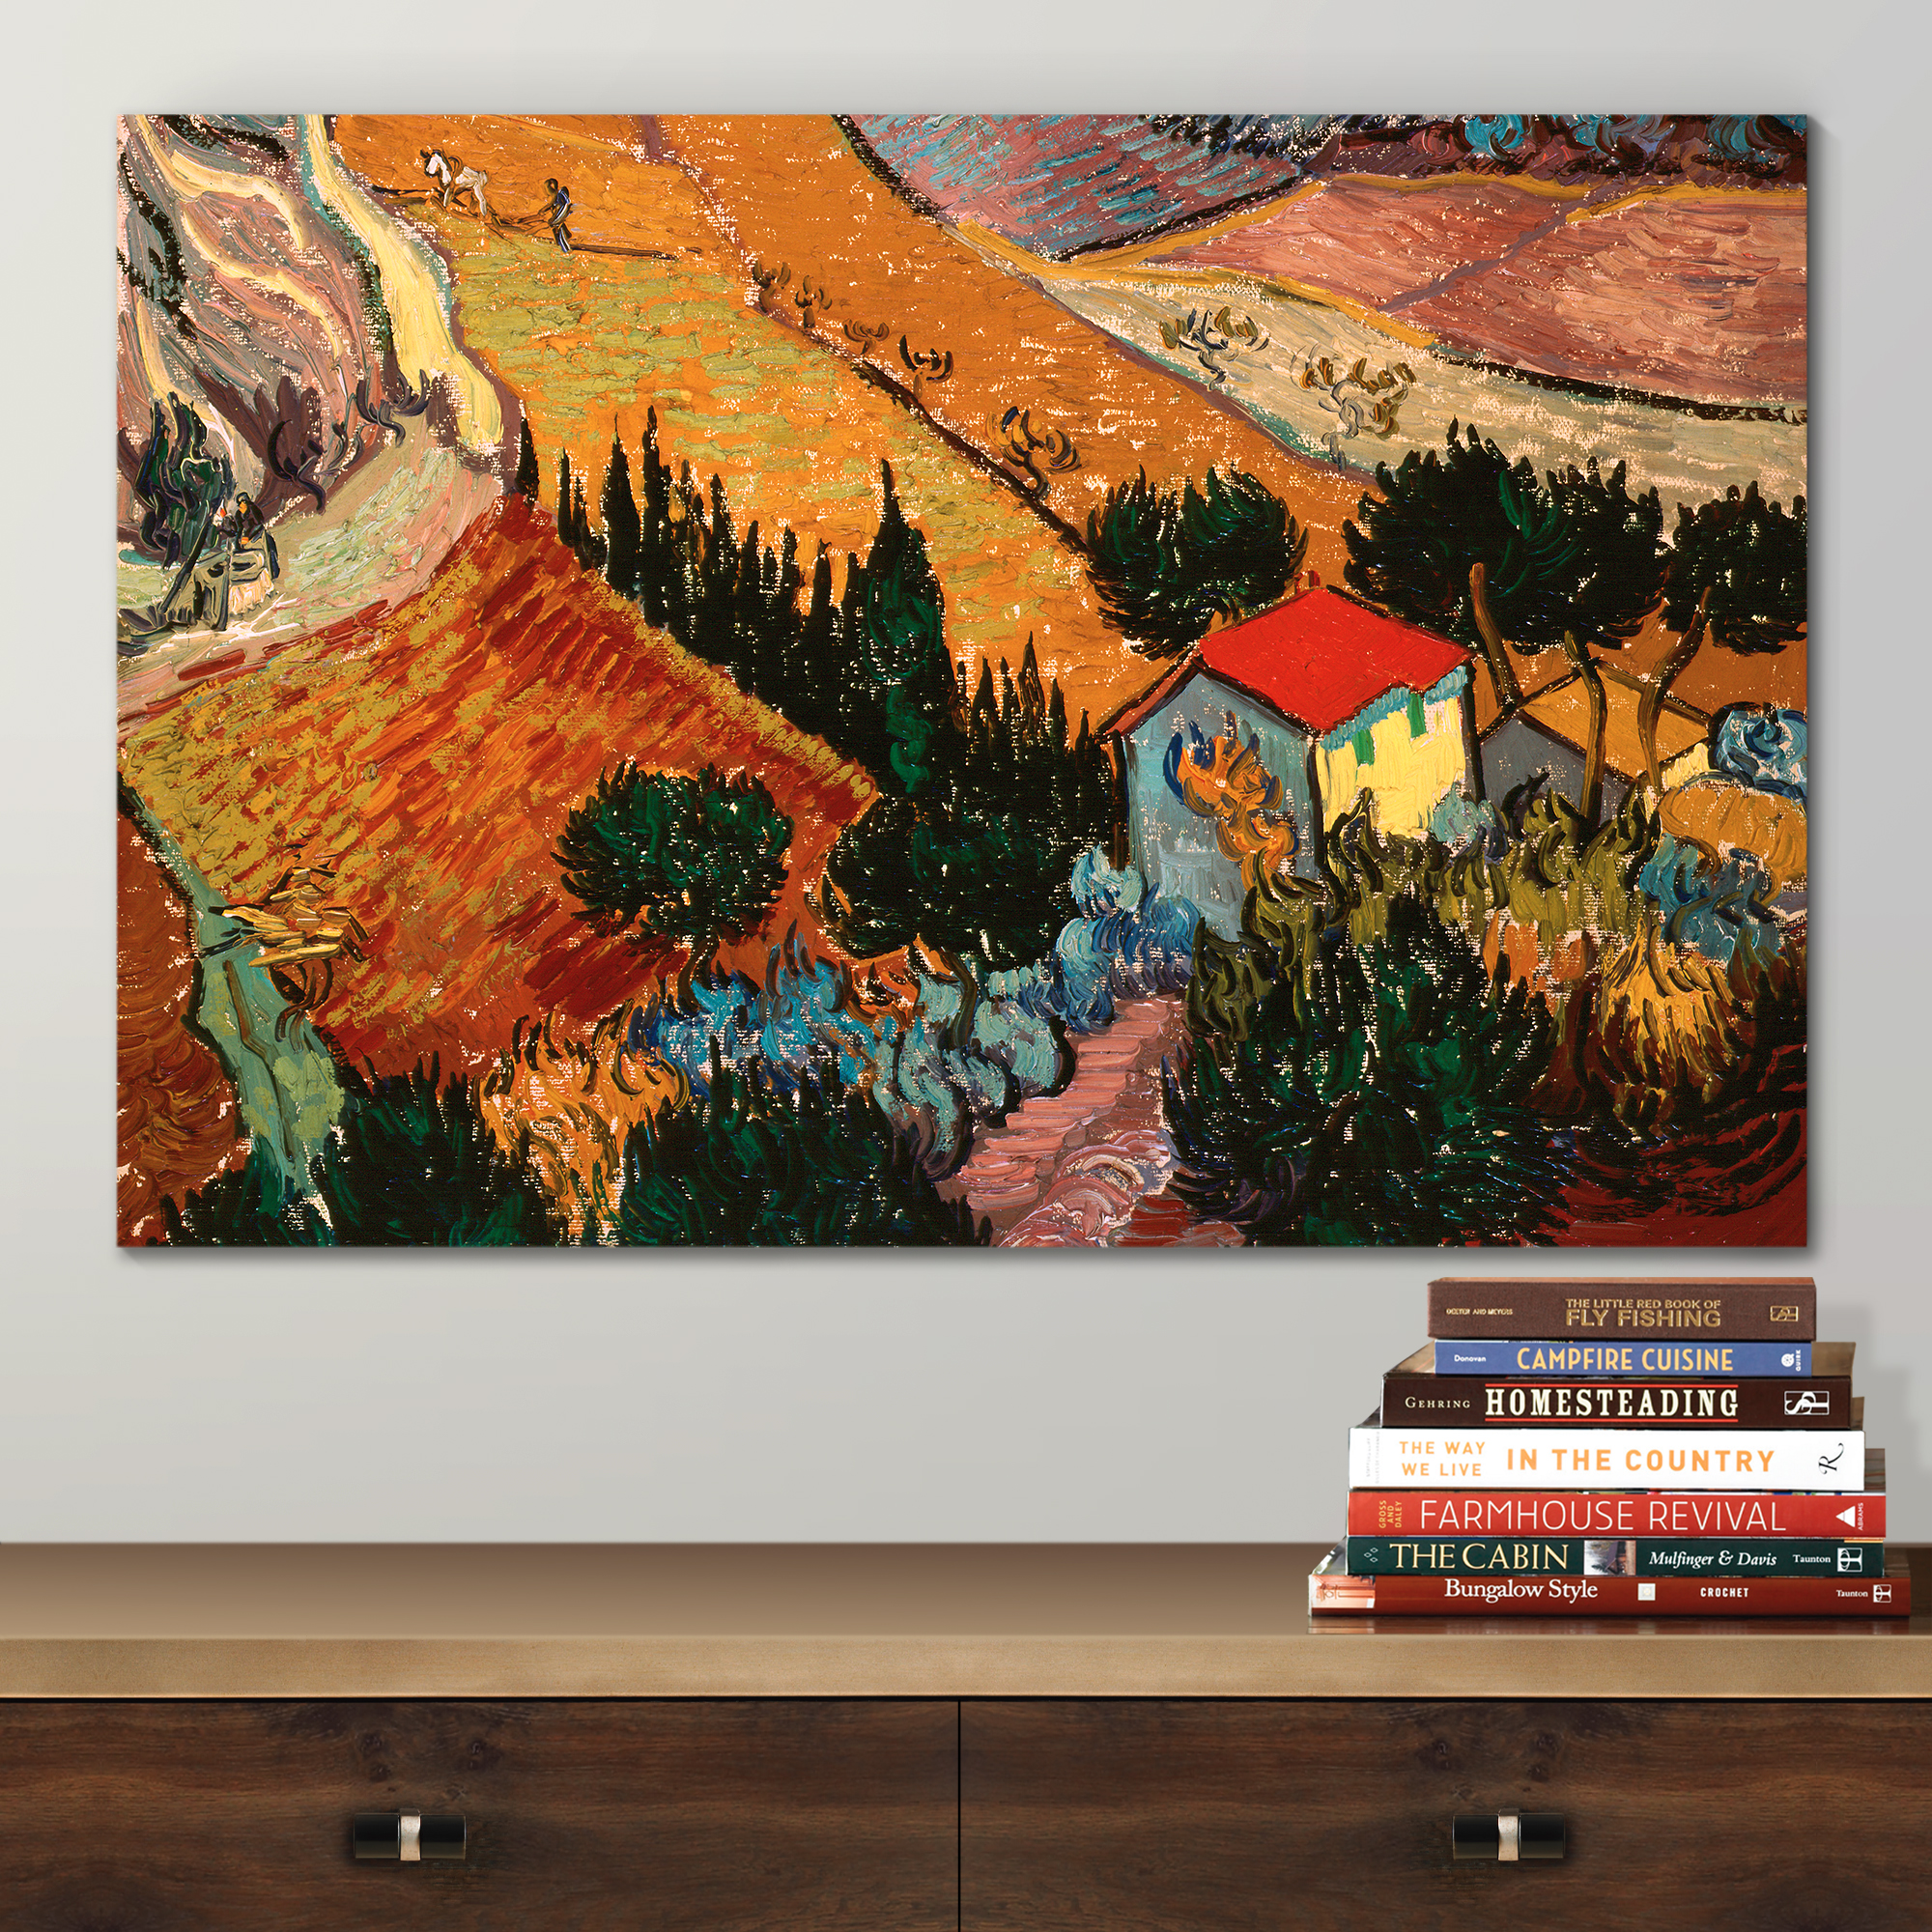 Valley with Ploughman Seen from Above by Vincent Van Gogh - Canvas Print Wall Art Famous Painting Reproduction - 24